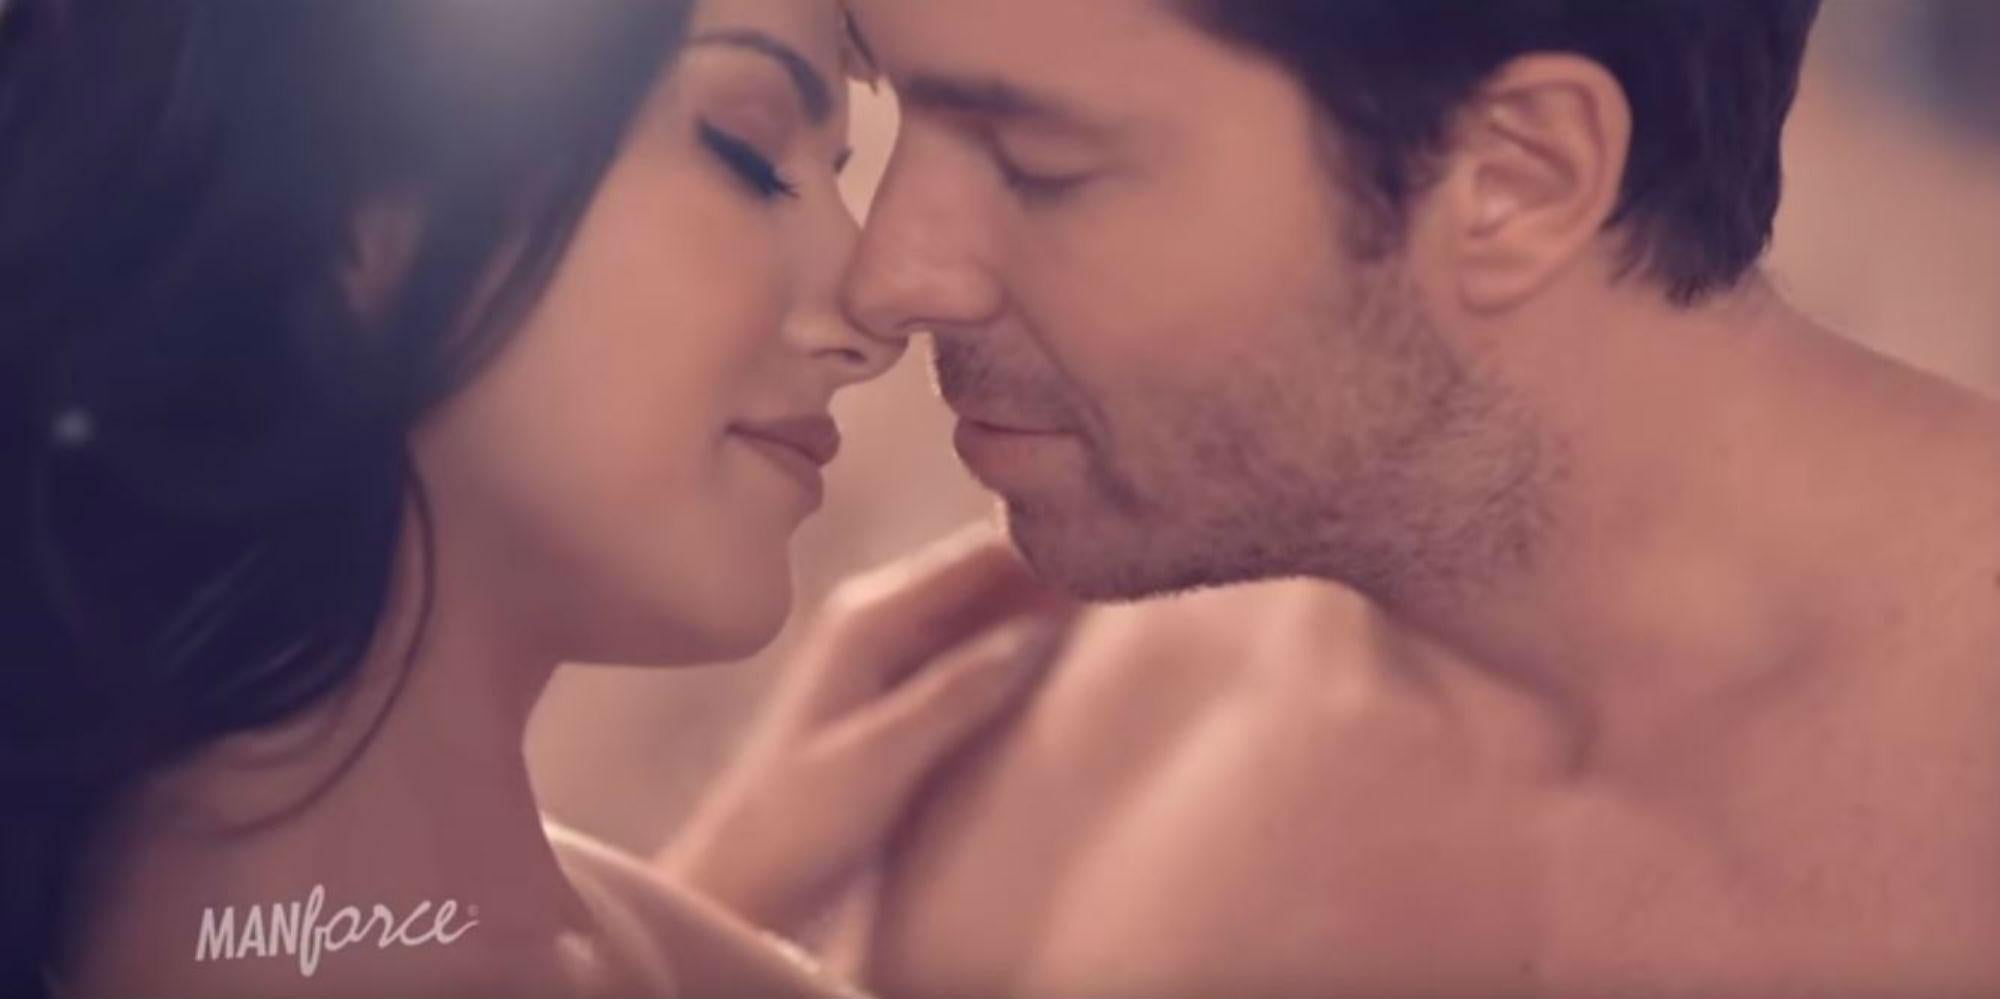 A condom advert featuring an ex porn star is causing fury in India ...